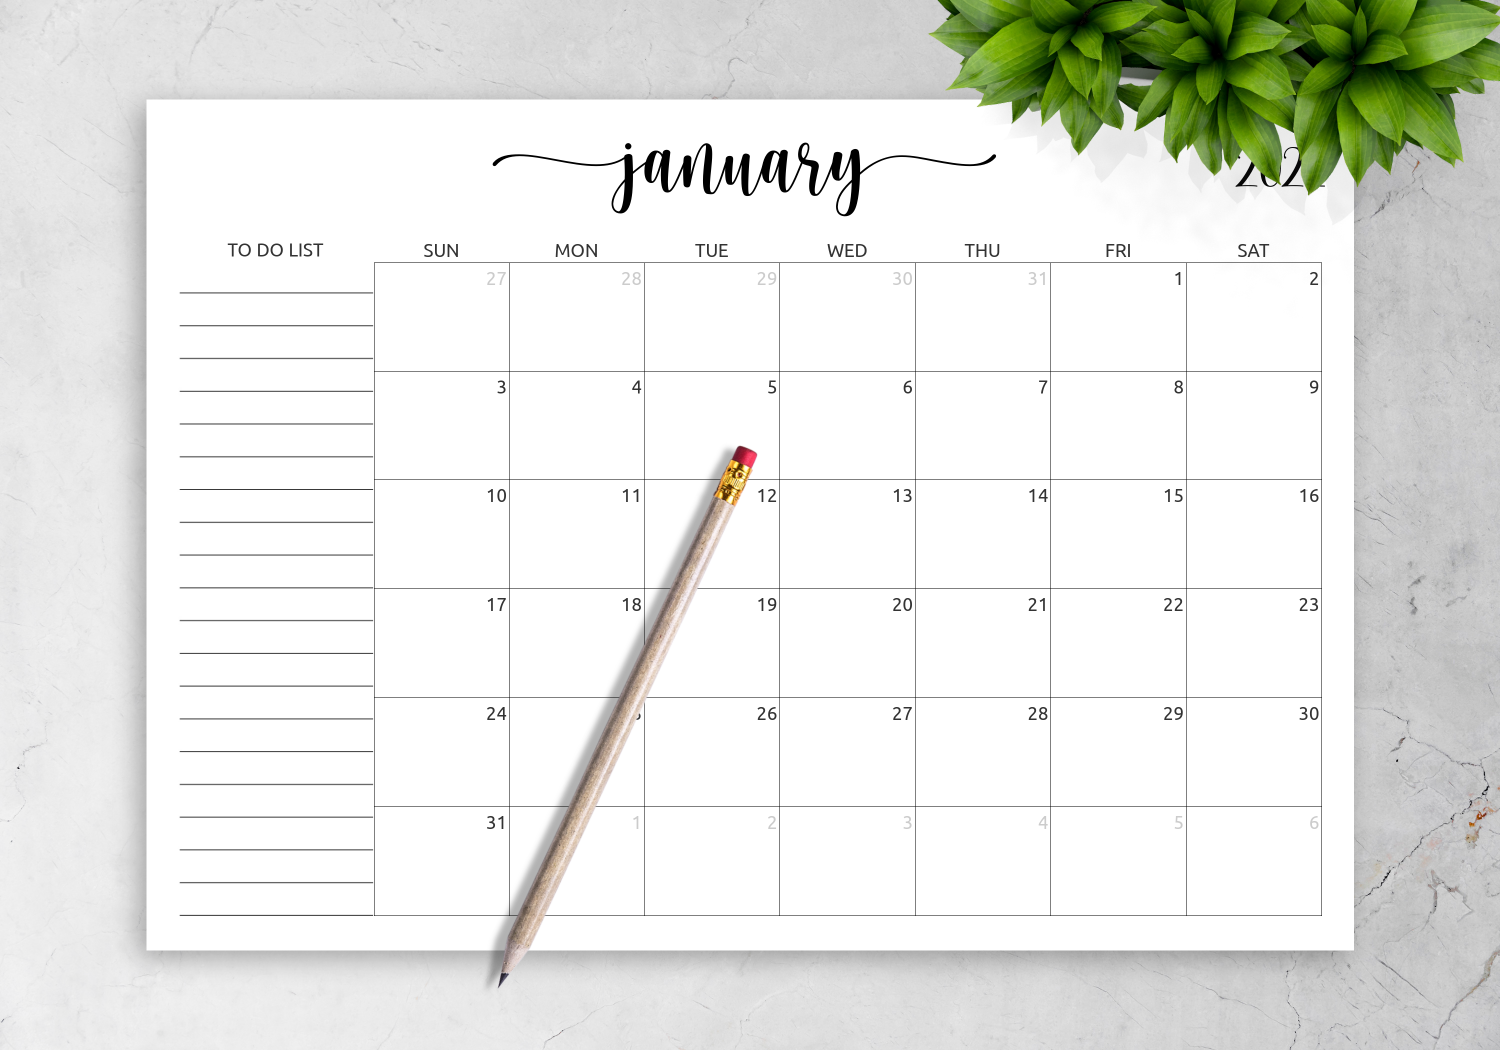 Paper To Do List Calendar 2021 Monthly Planner Printable Organizer Planner Printable Calendars